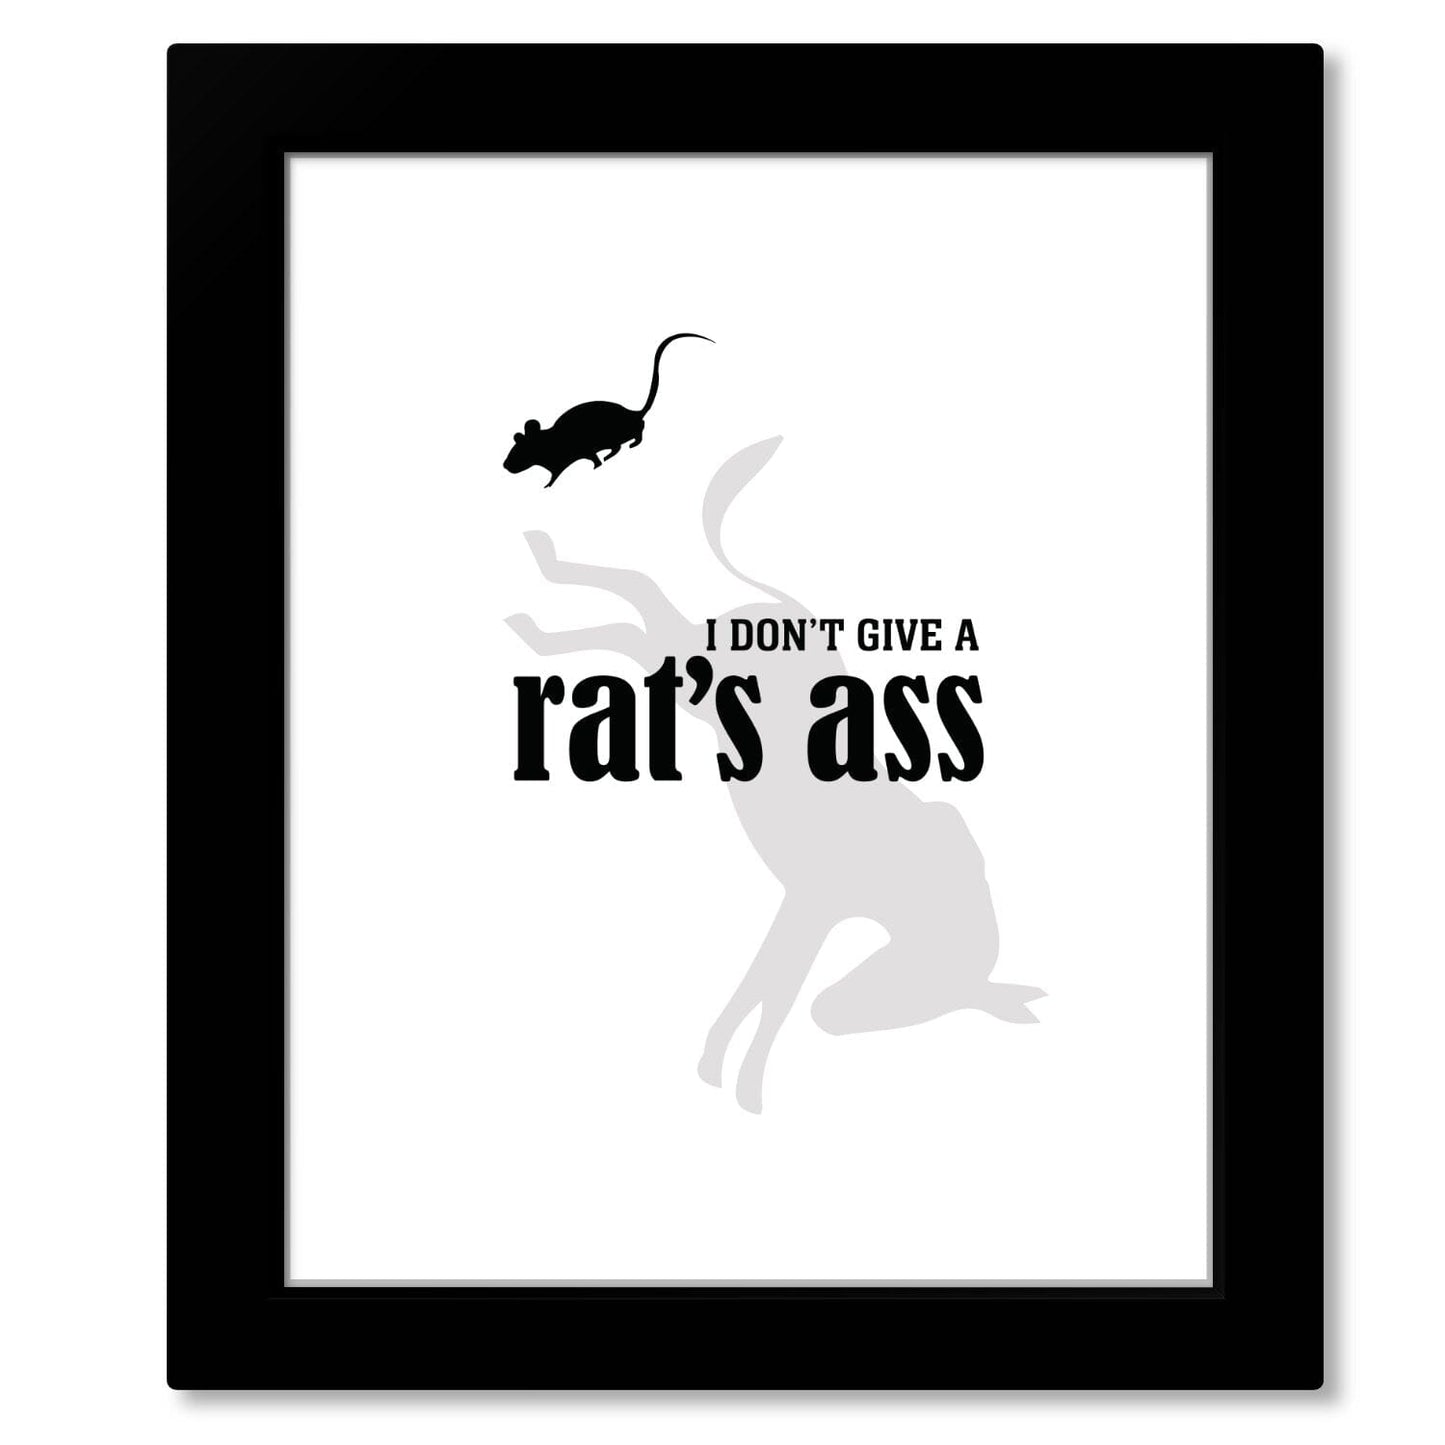 I Don't Give a Rat's Ass - Wise and Witty Sarcastic Print Wise and Wiseass Quotes Song Lyrics Art 8x10 Black Matted Print 